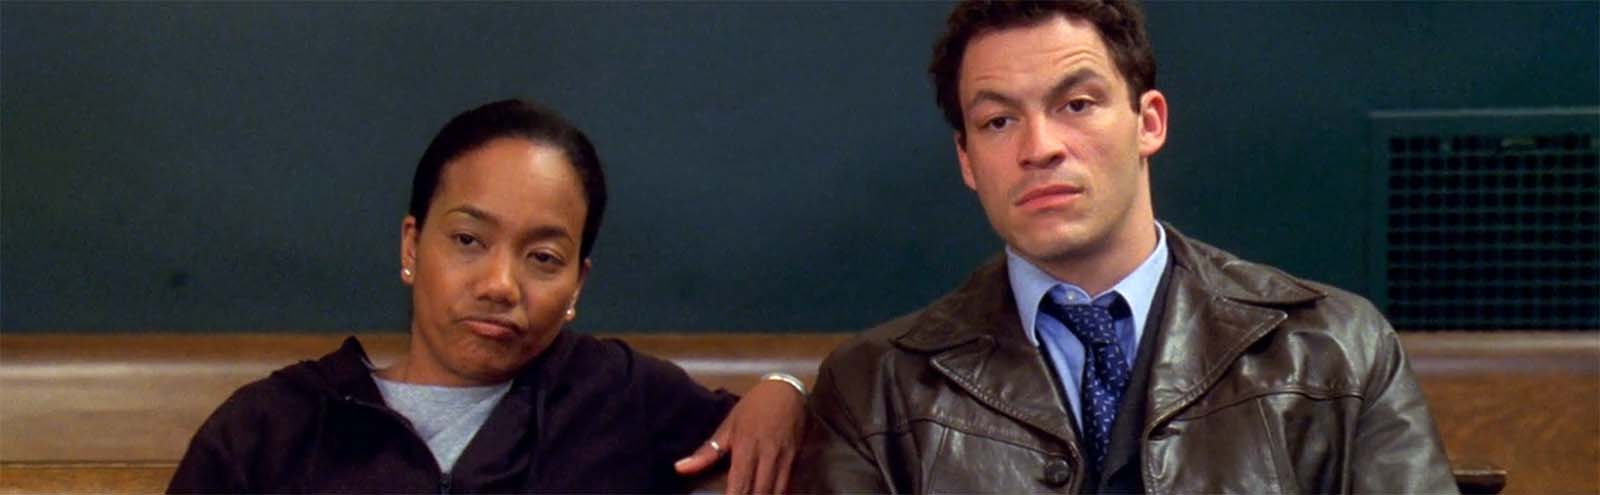 Sonja Sohn and Dominic West as Kima and McNulty on The Wire 2002